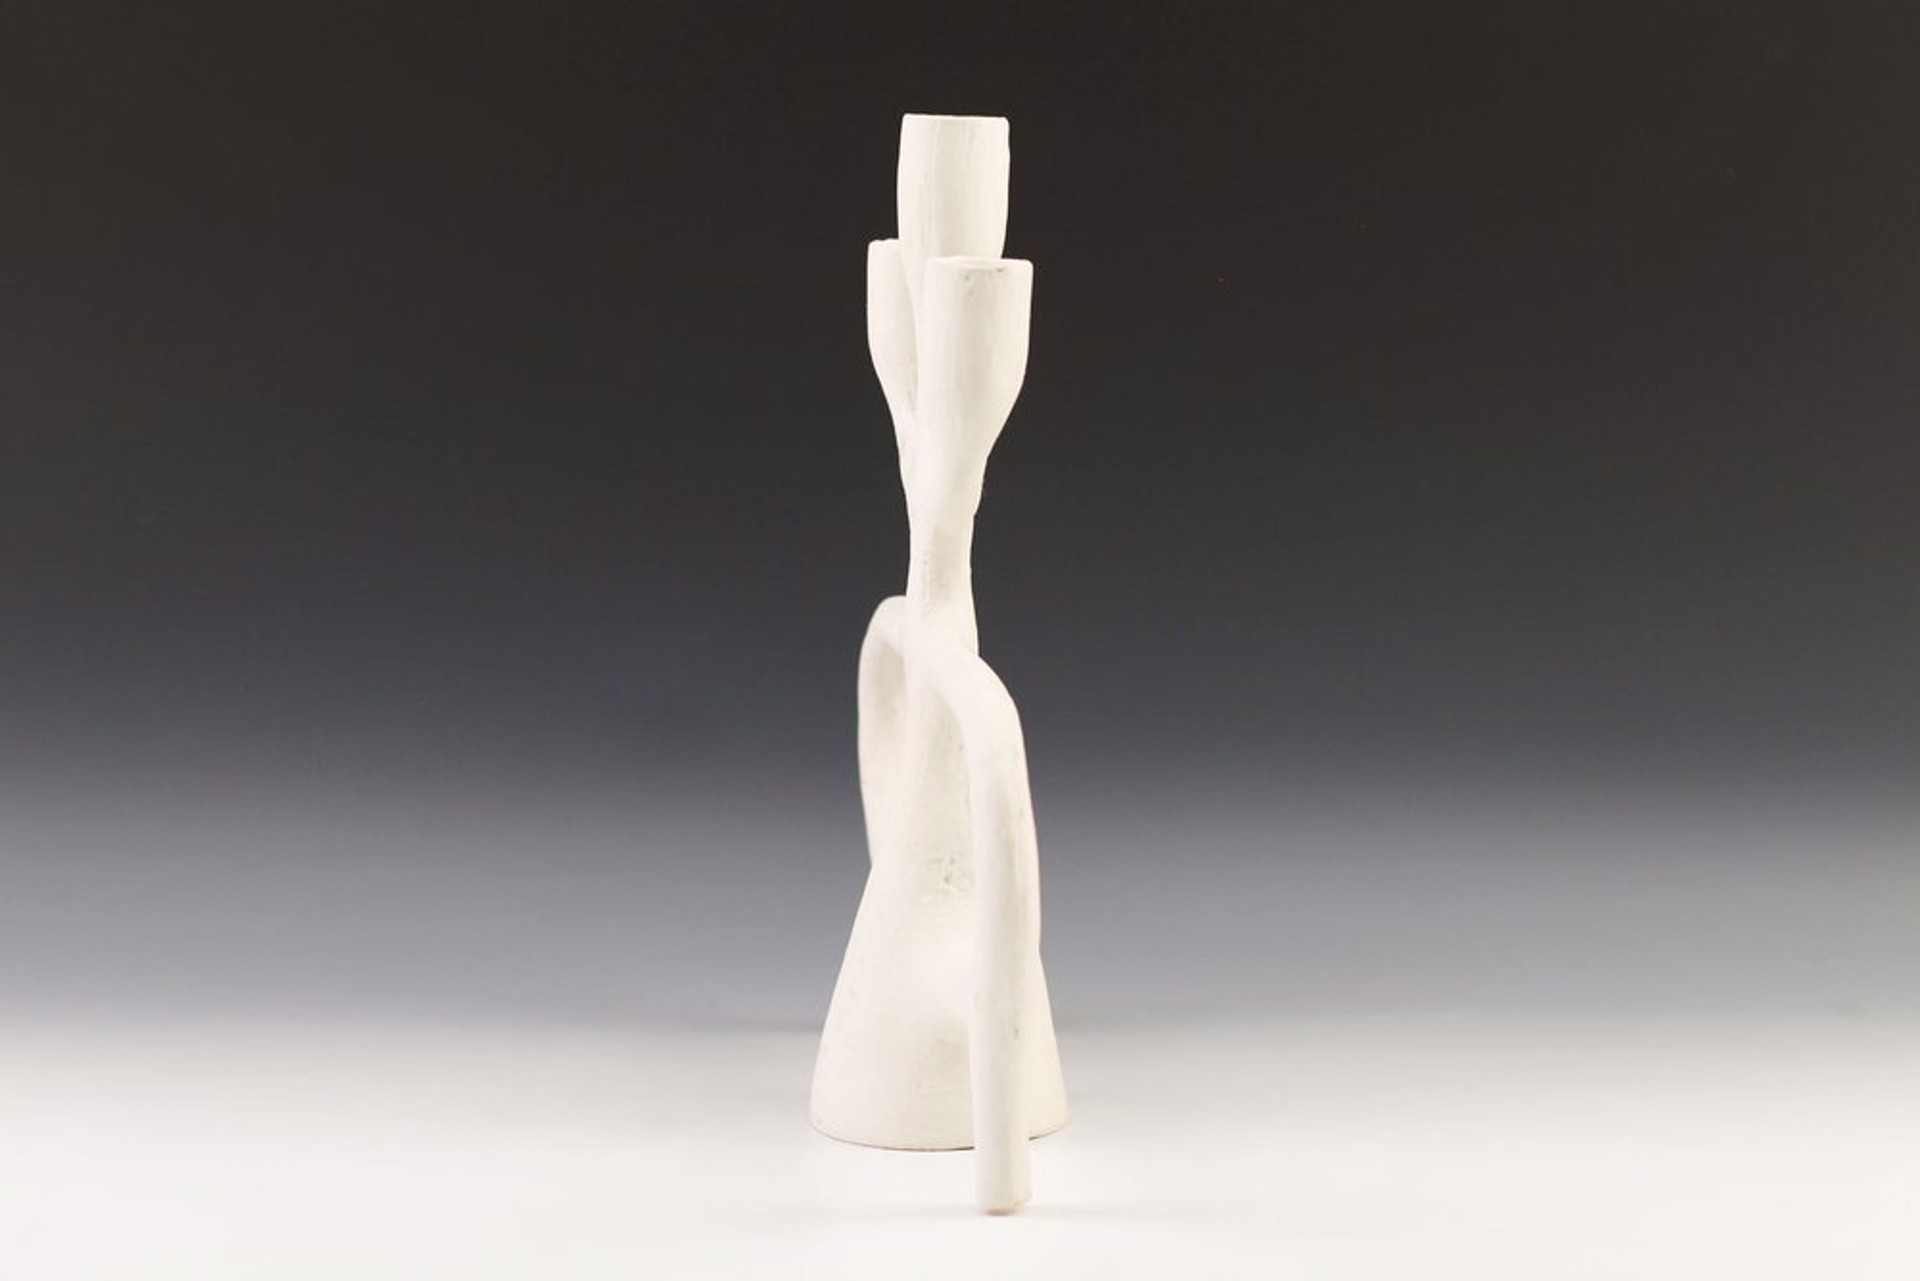 Abstract Candle Holder - 3 Candles by Maggie Jaszczak